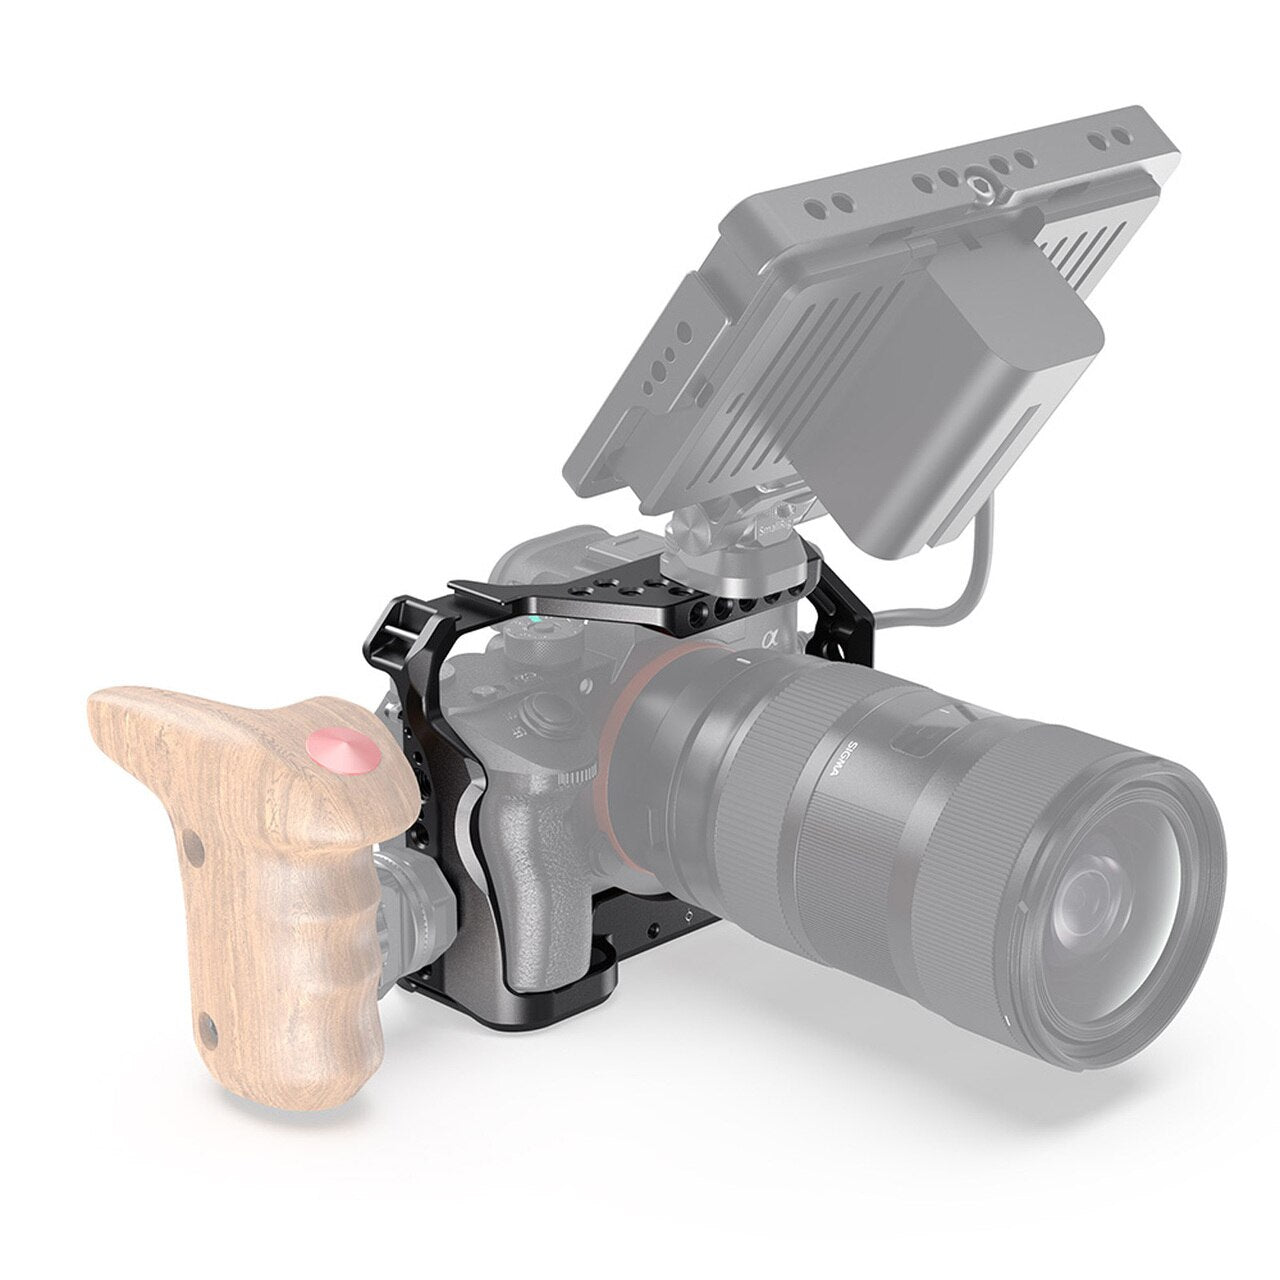 SMALLRIG Cage for SONY A7 III / A7 R III 2087 (DISCONTNUED)